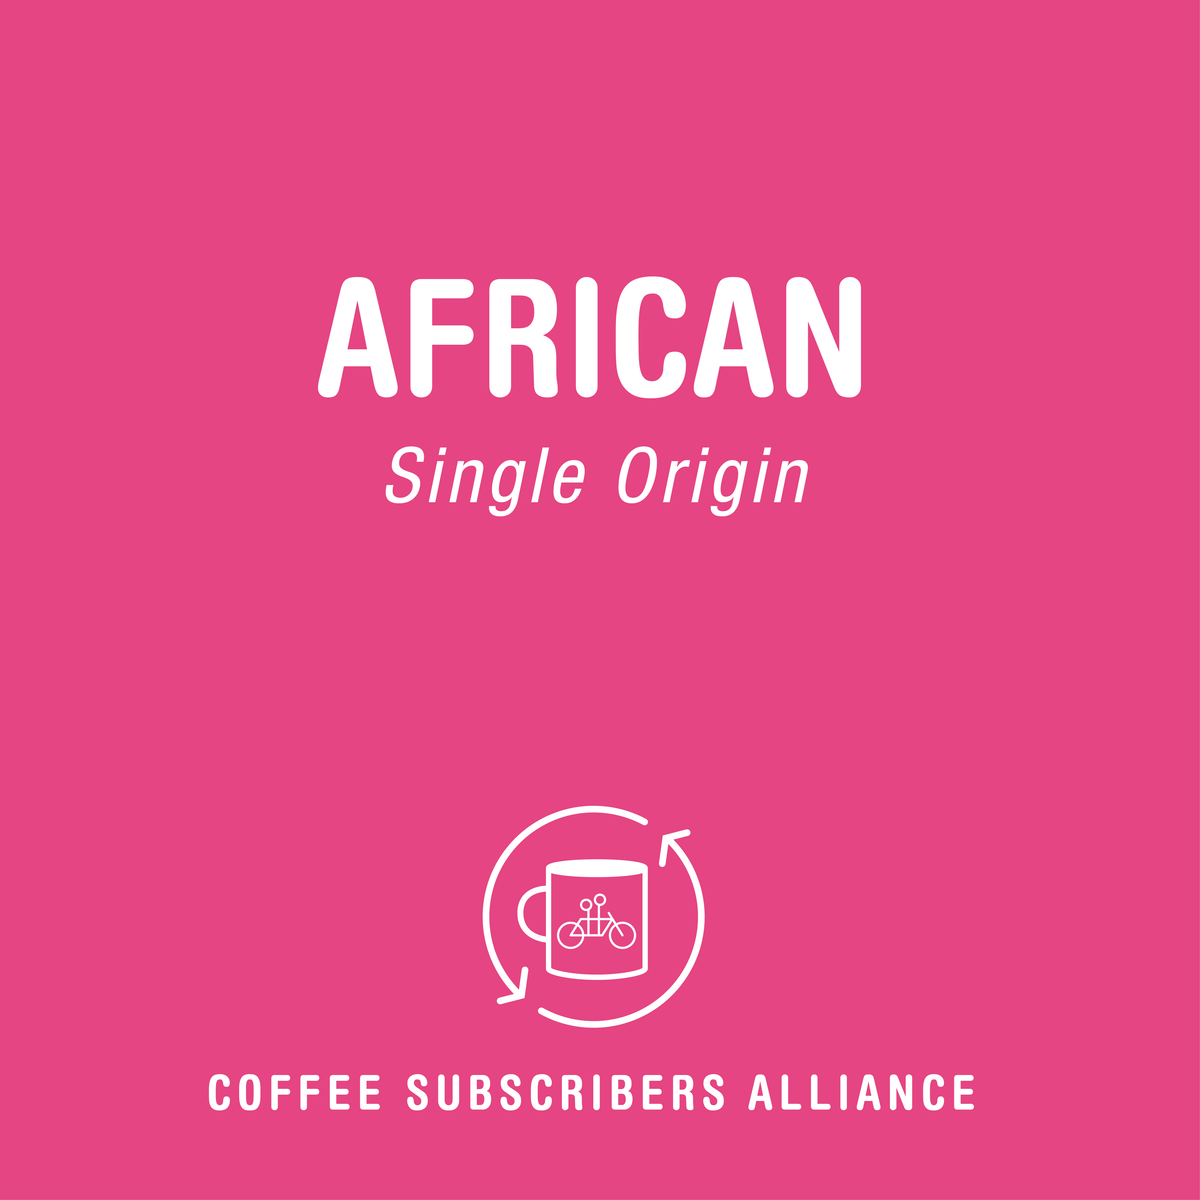 A graphic with a pink background featuring the text "African Subscription" at the top and "Tandem Coffee Roasters" at the bottom. A circular logo in the center depicts a coffee cup with steam.